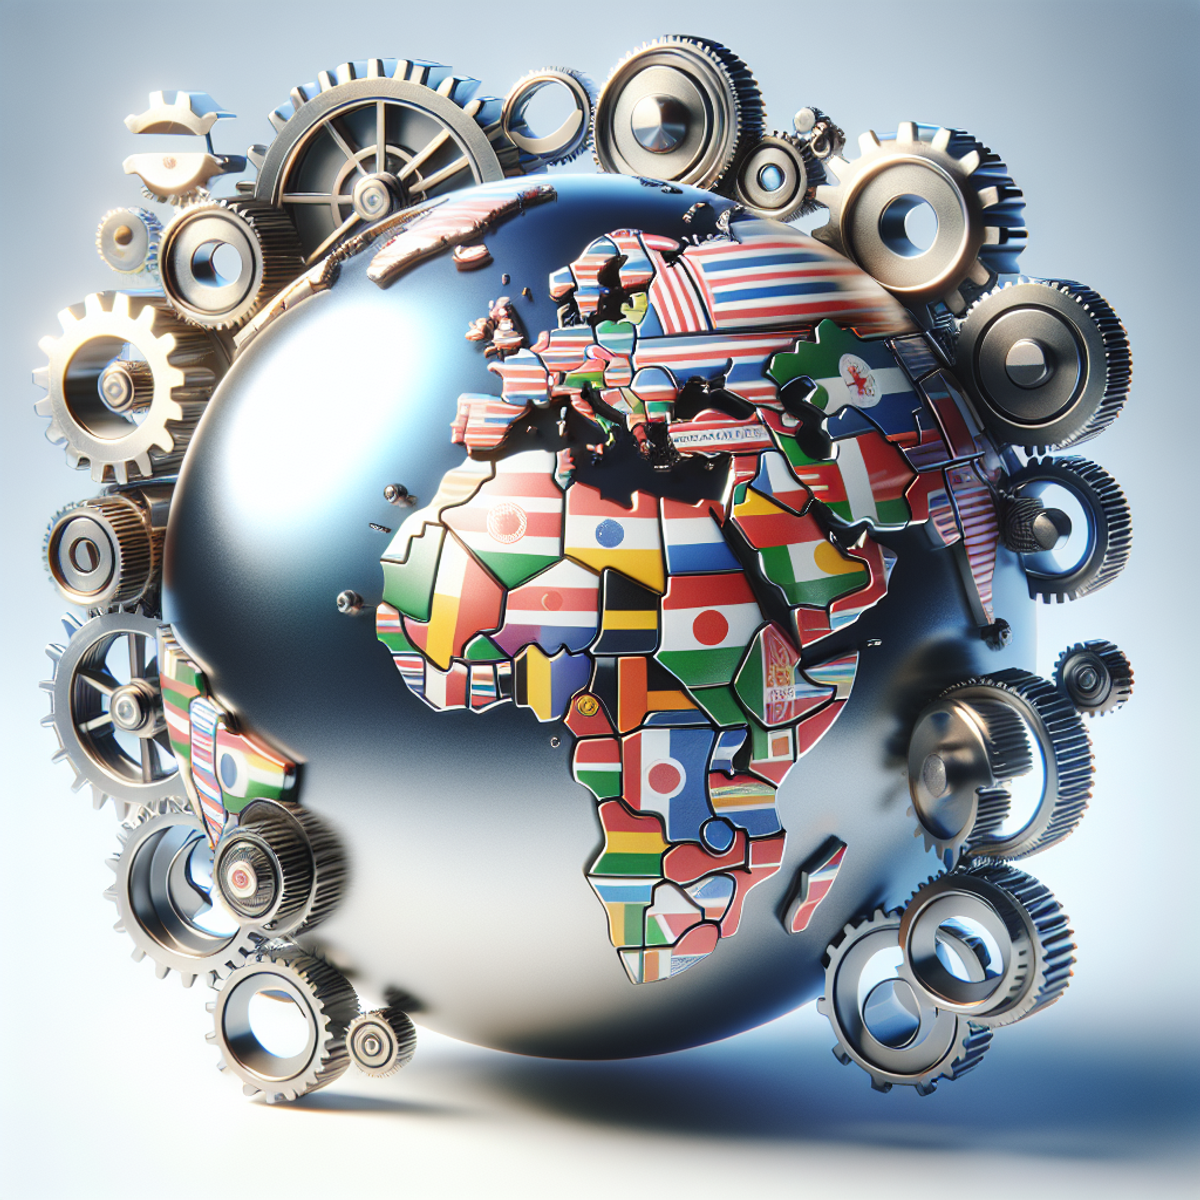 A 3D globe with colorful patterns surrounded by metallic gears.